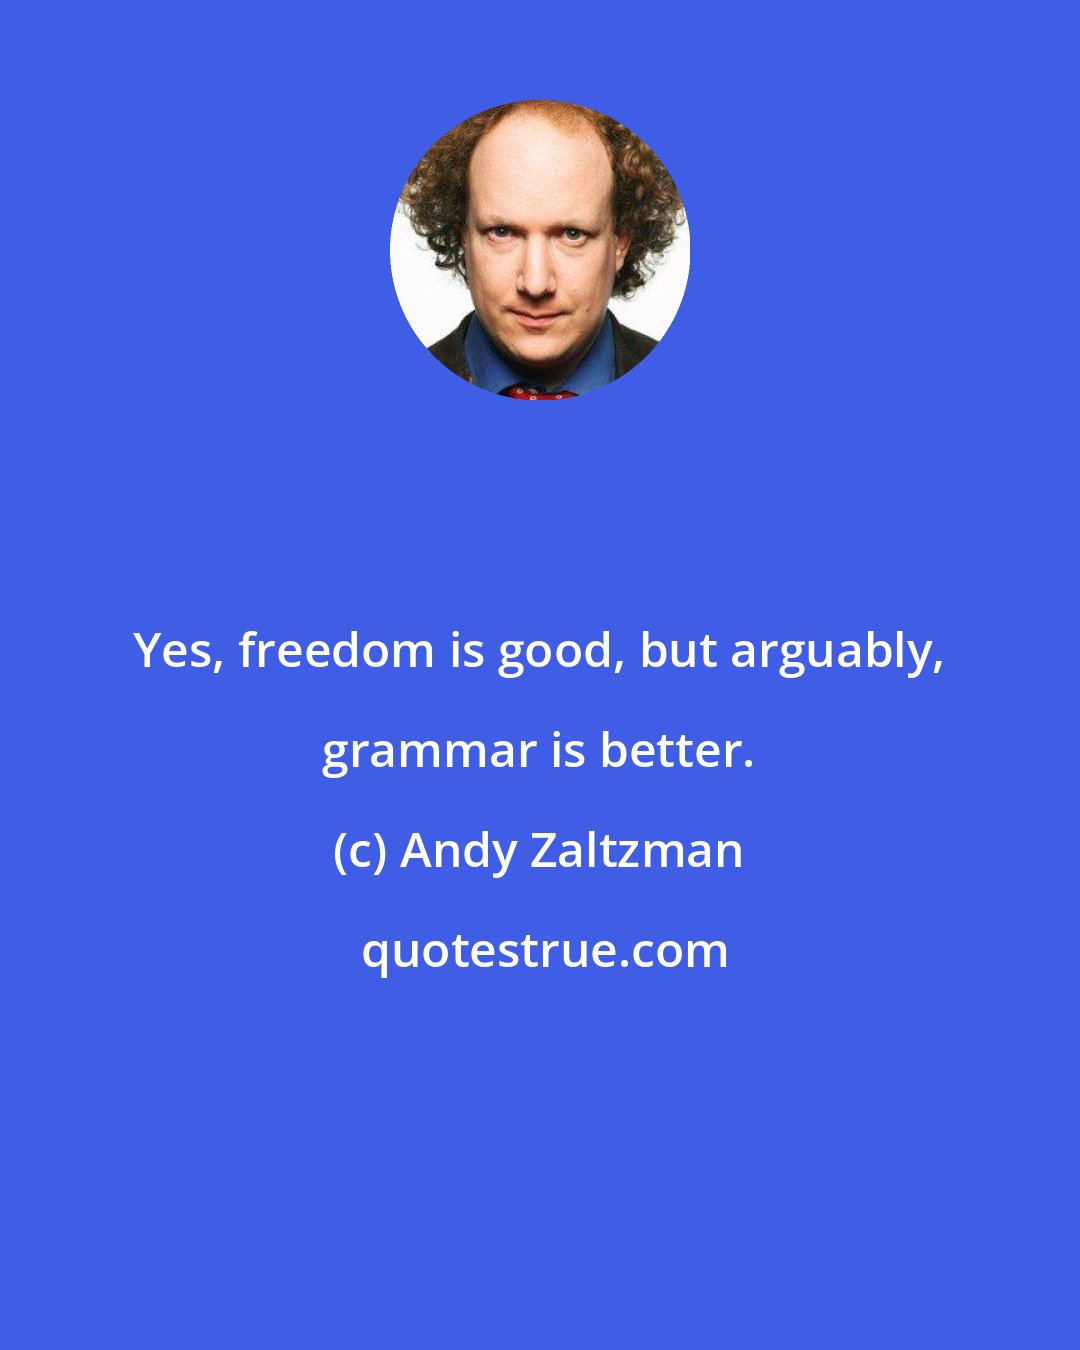 Andy Zaltzman: Yes, freedom is good, but arguably, grammar is better.